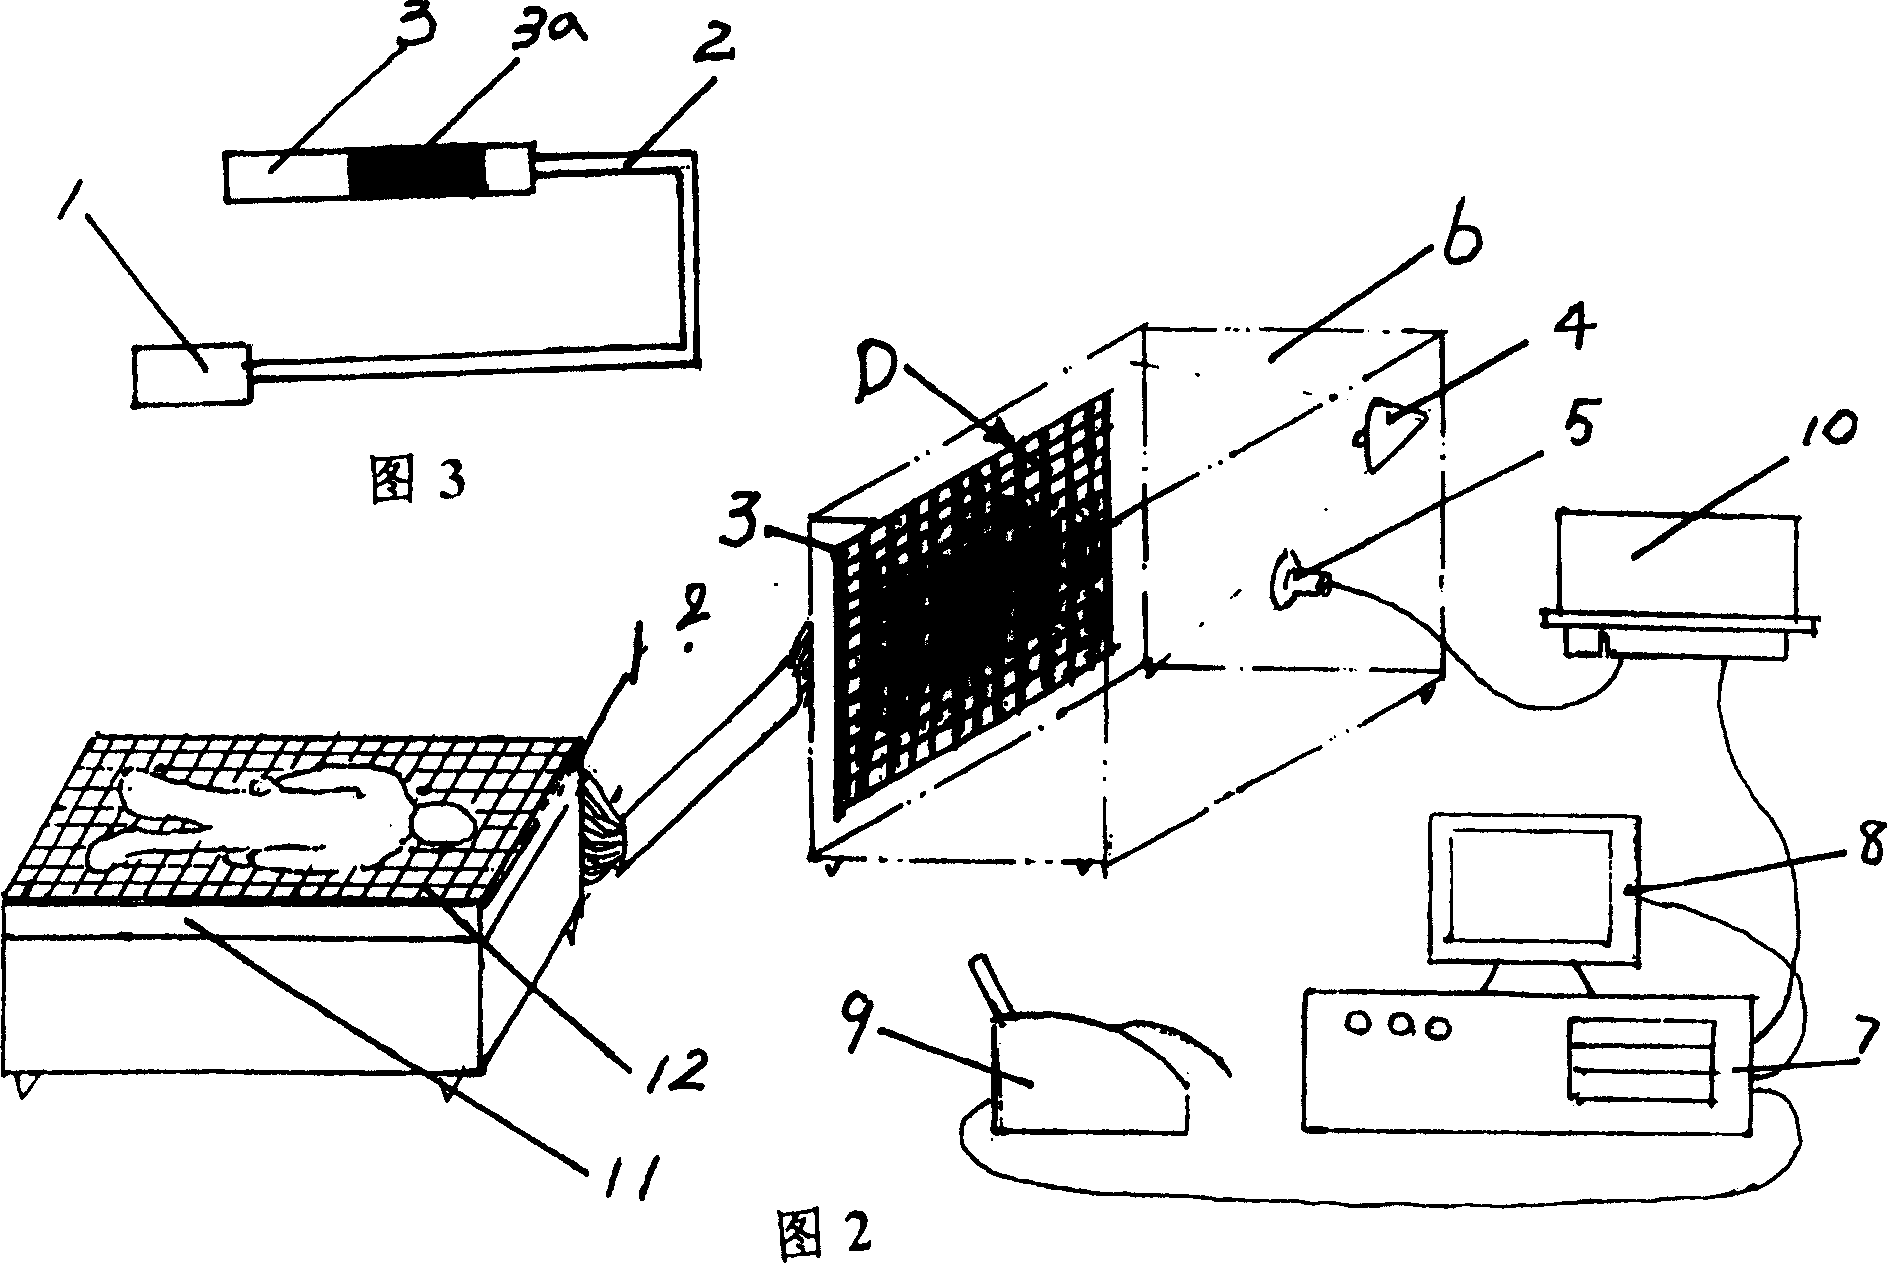 Pressure measuring and analytic device based on image information processing technology